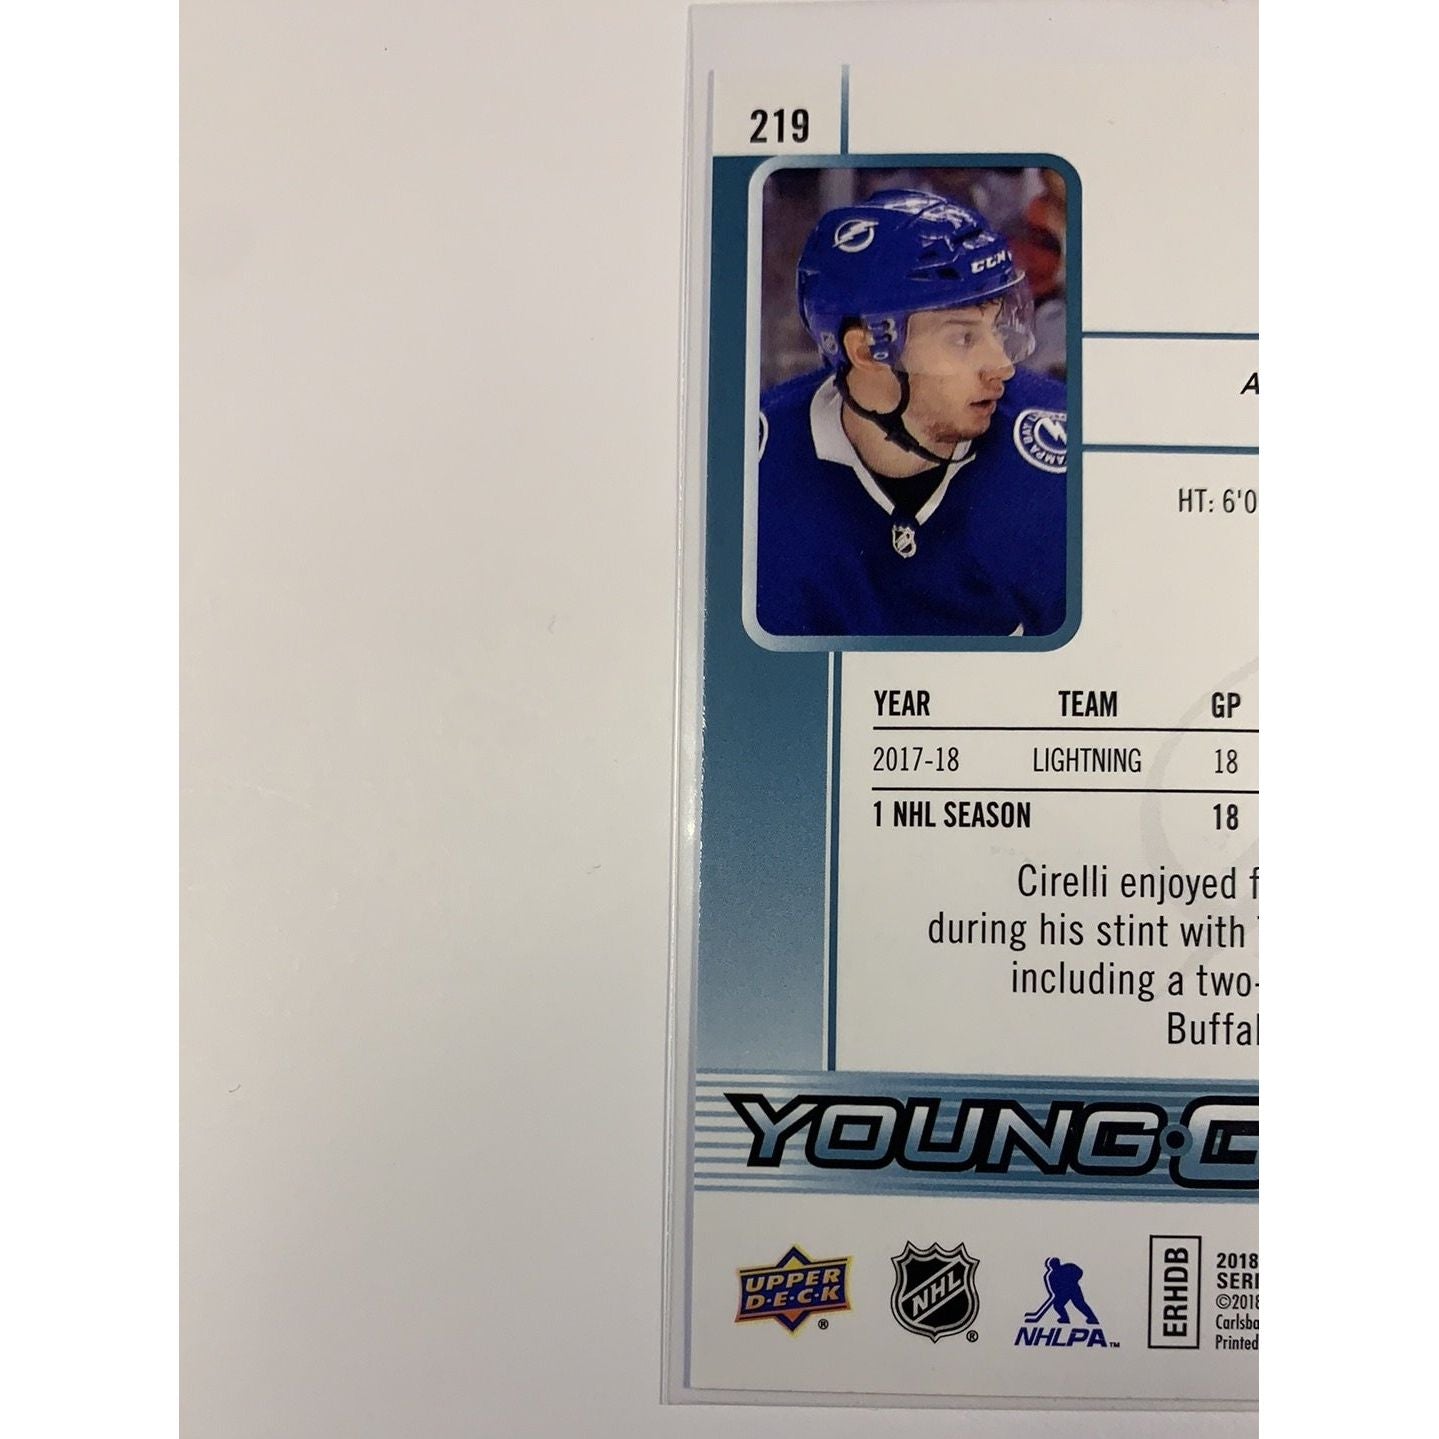  2018-19 Upper Deck Series 1 Anthony Cirelli Young Guns  Local Legends Cards & Collectibles